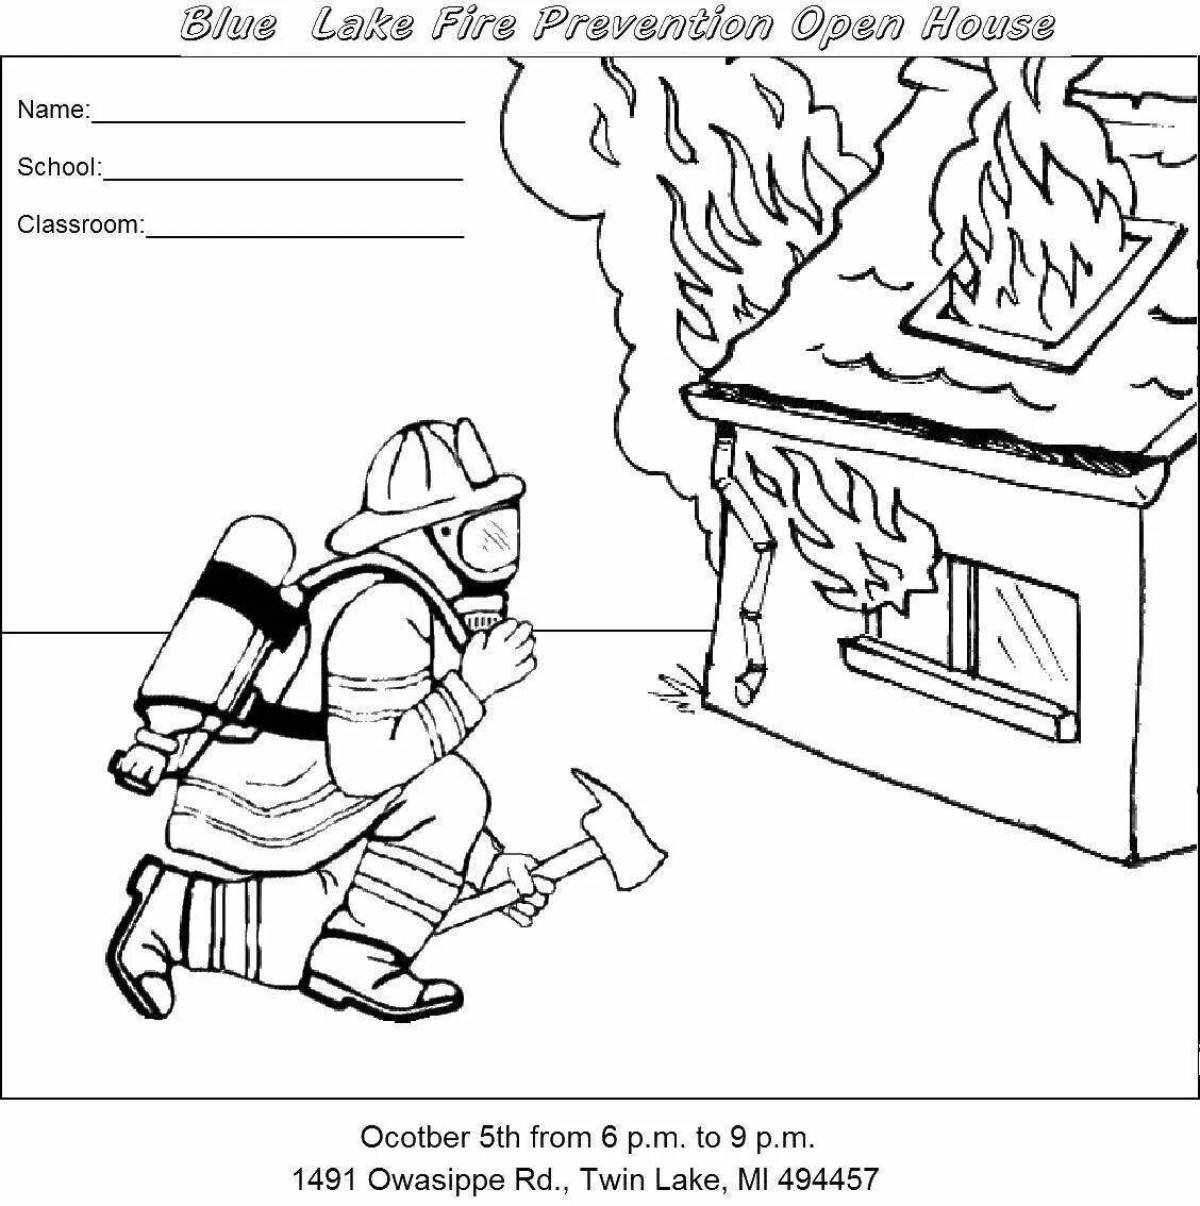 Attractive burning house coloring book for kids